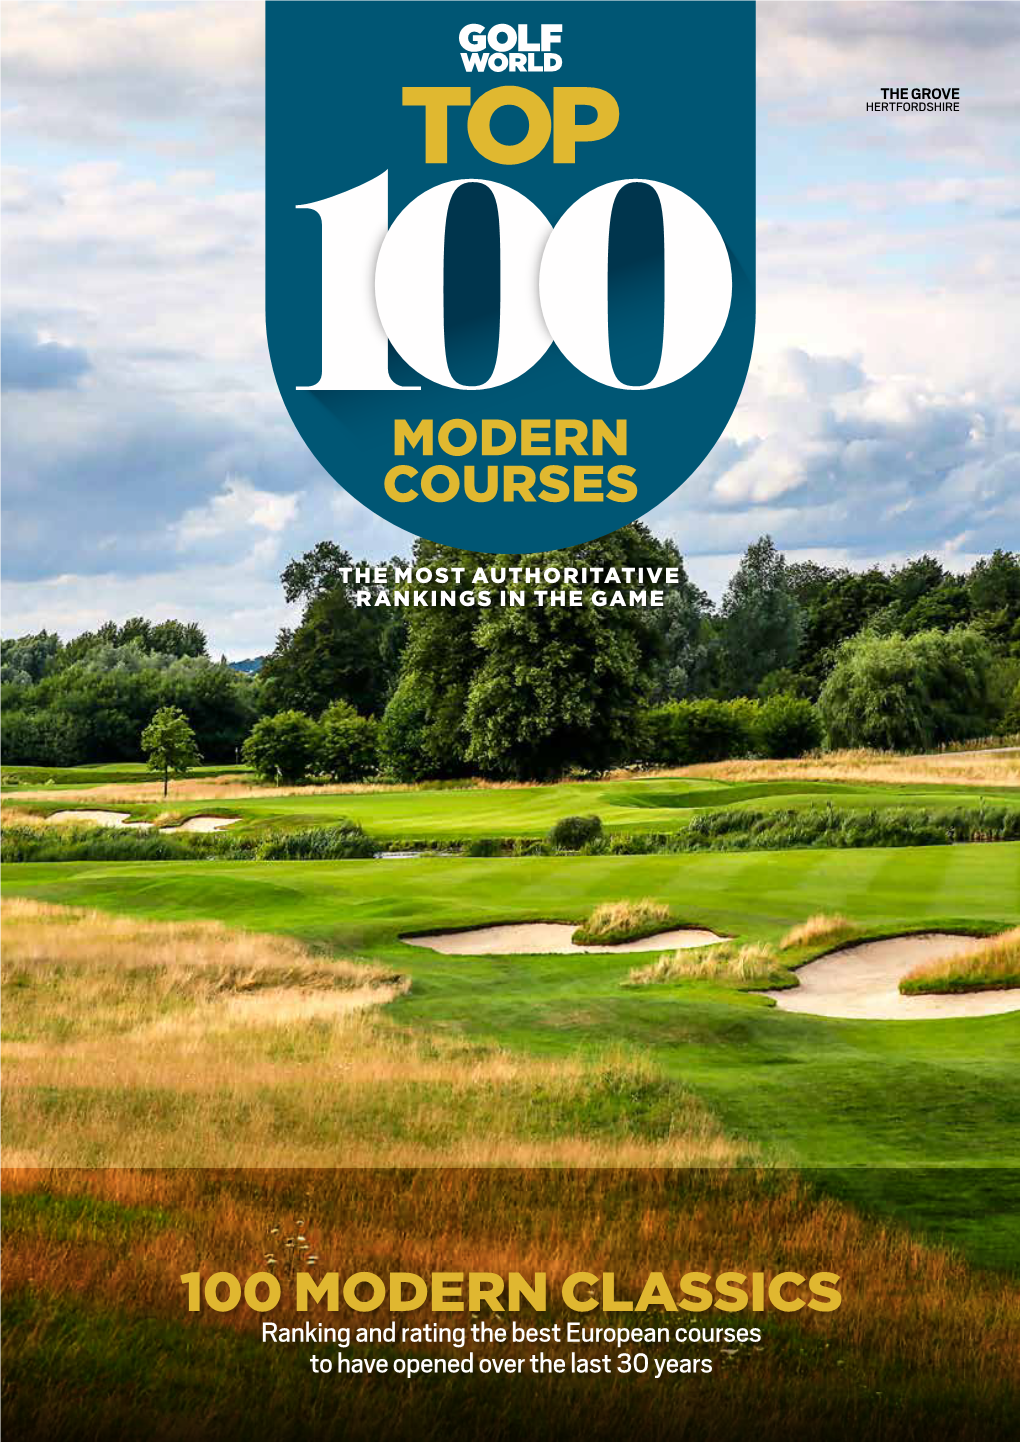 Europes Best Modern Golf Courses by Golf World And